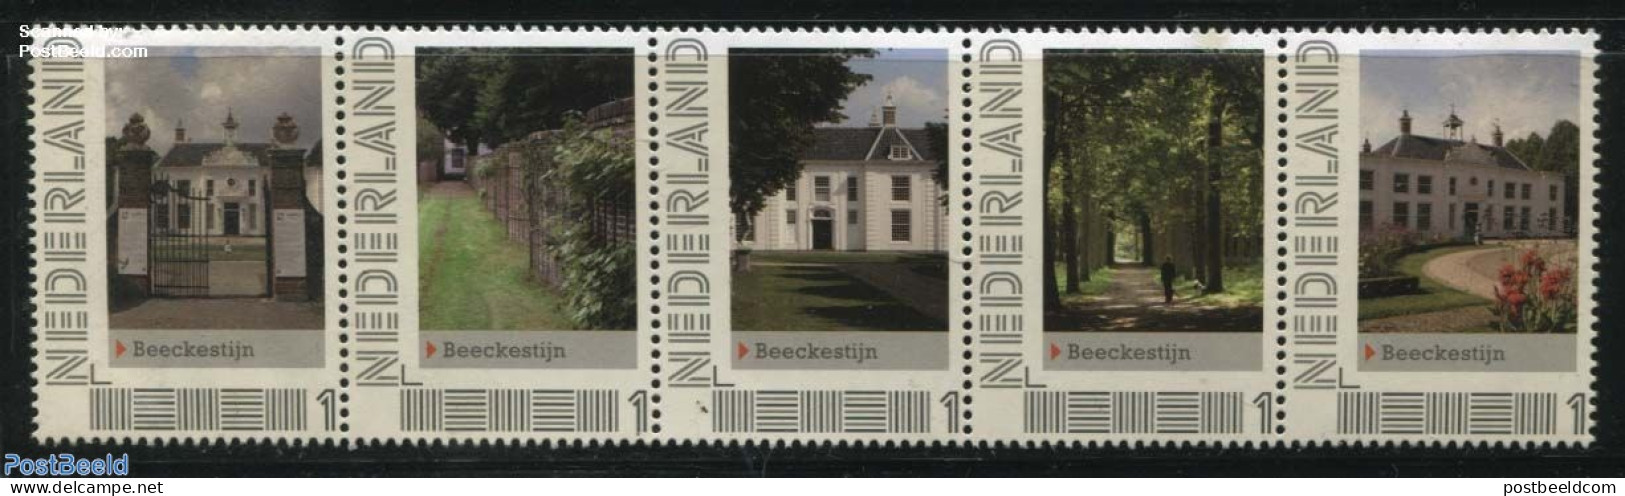 Netherlands - Personal Stamps TNT/PNL 2012 Beeckestijn 5V [::::], Mint NH, Nature - Trees & Forests - Castles & Fortif.. - Rotary, Lions Club